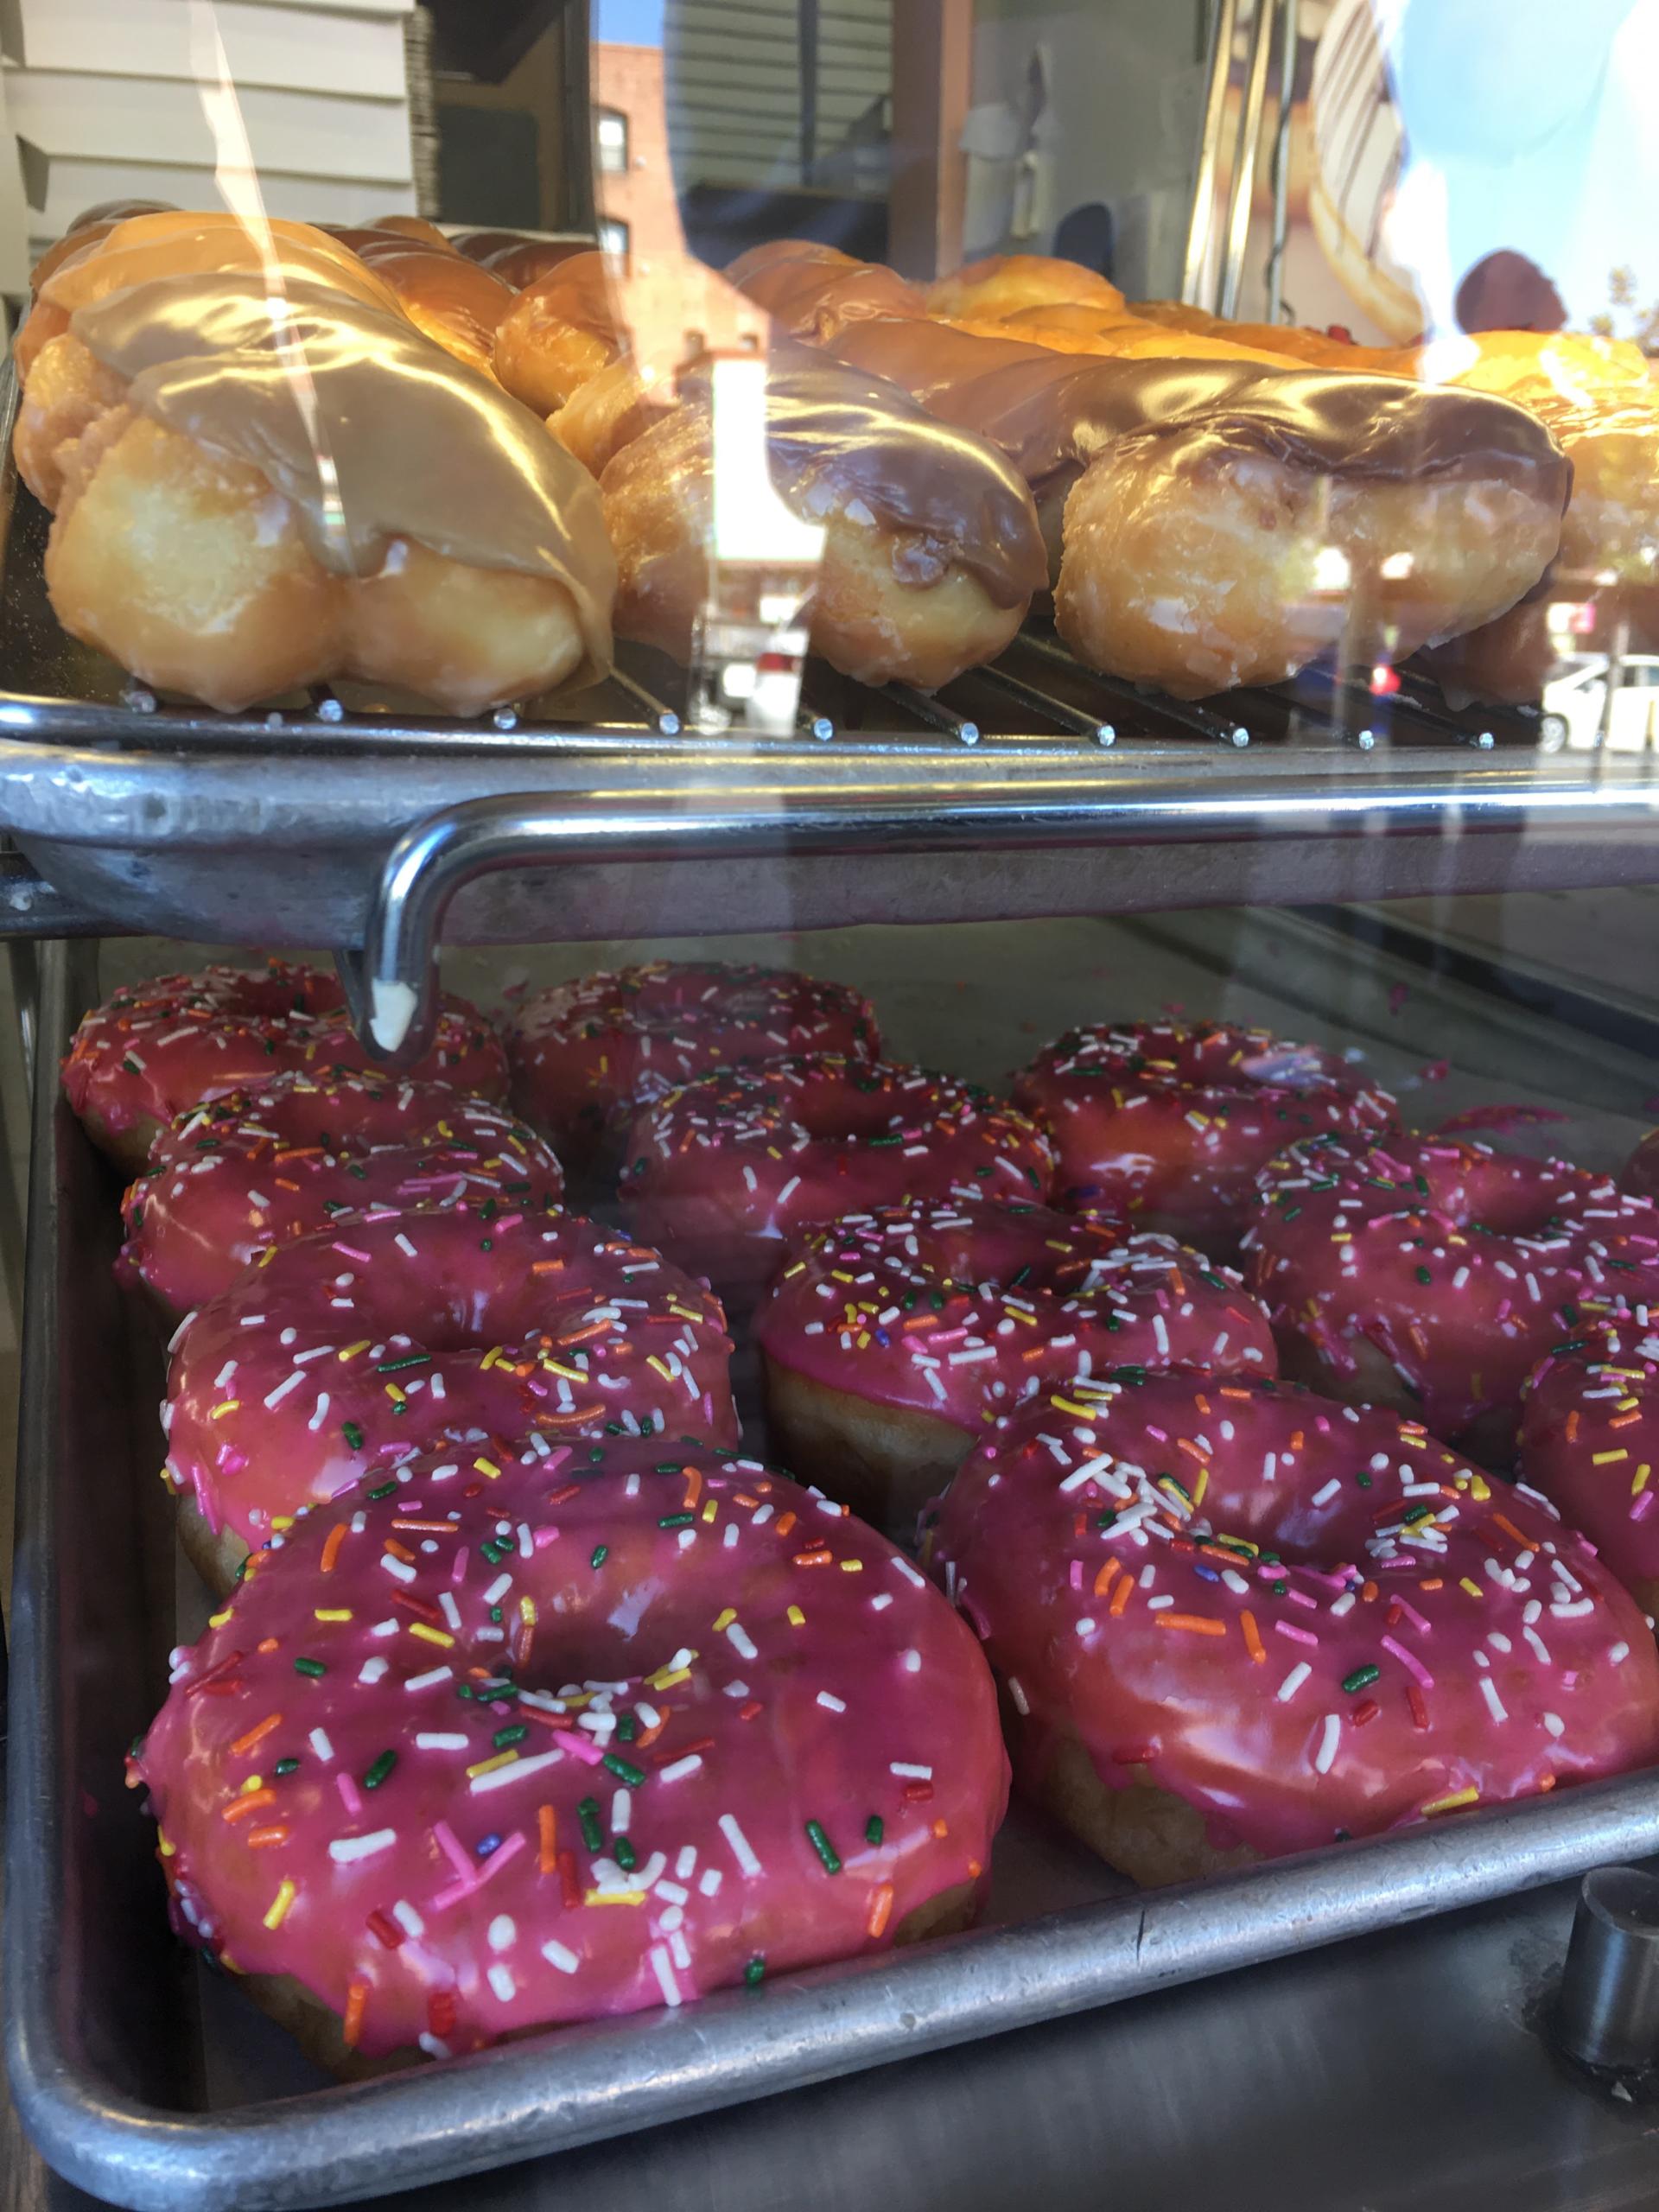 TRAVEL: The Best Donuts in Los Angeles